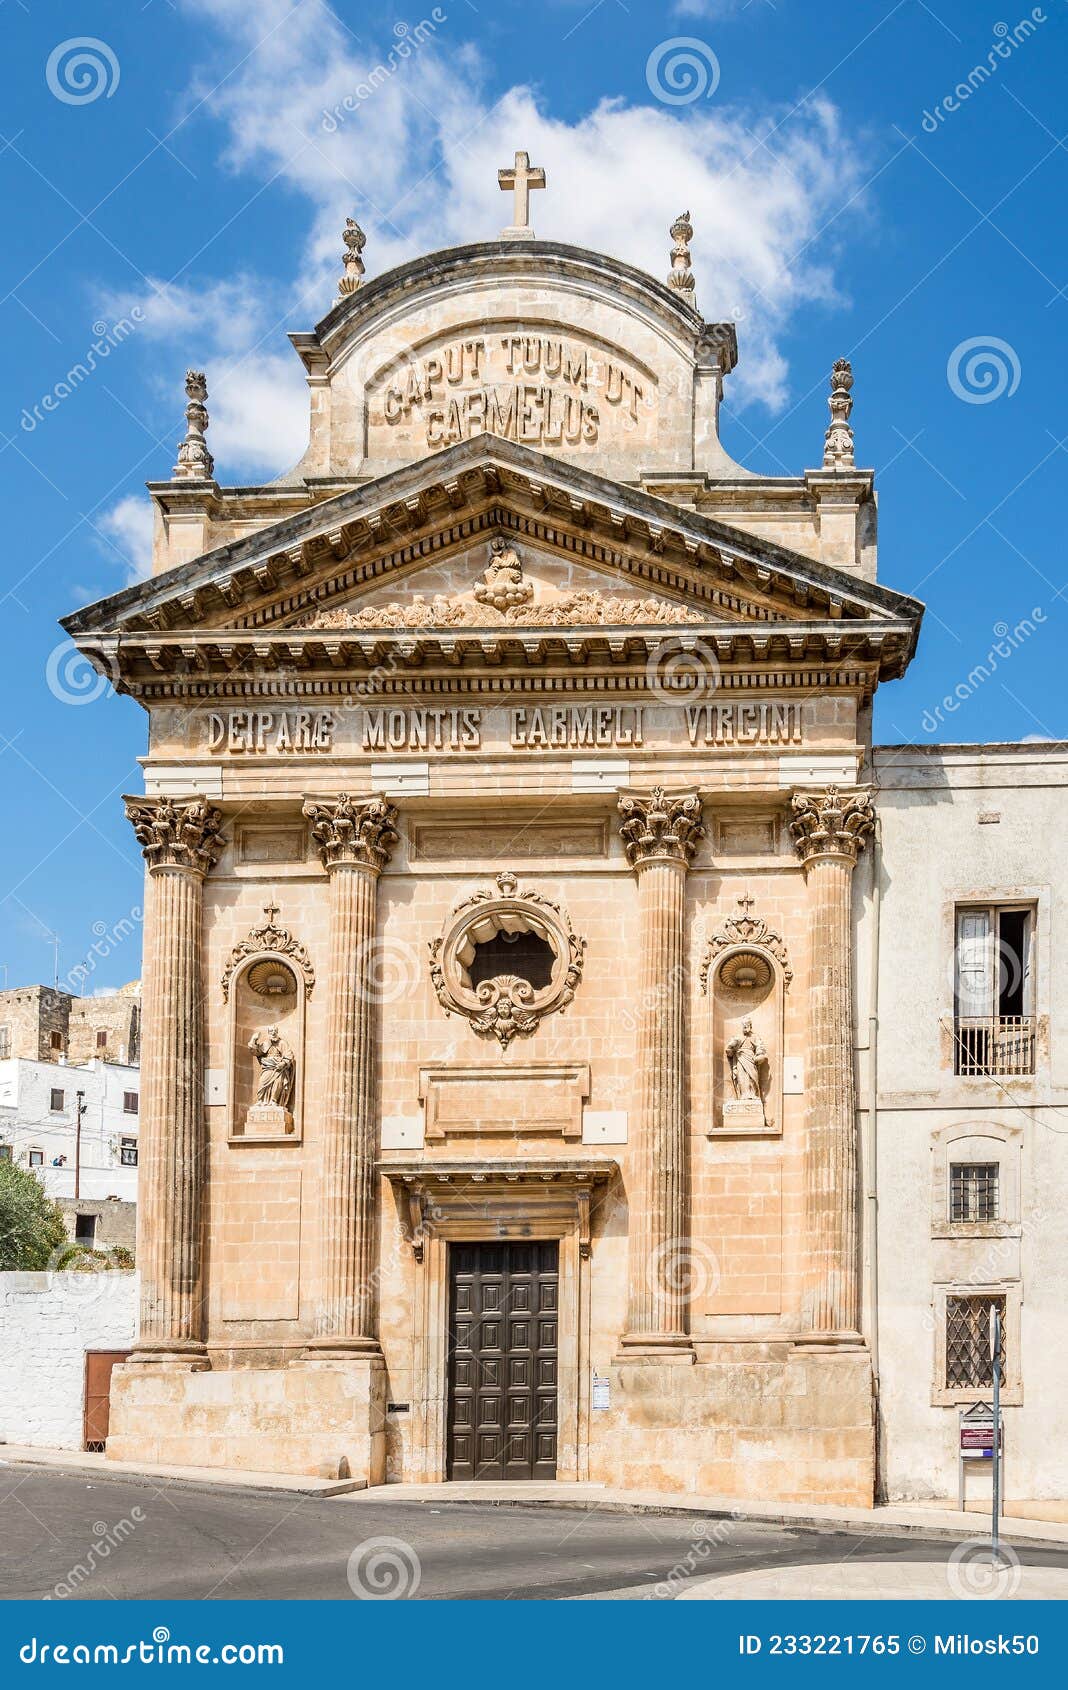 view at the church of carmelitas in the streets of ostuni - italy